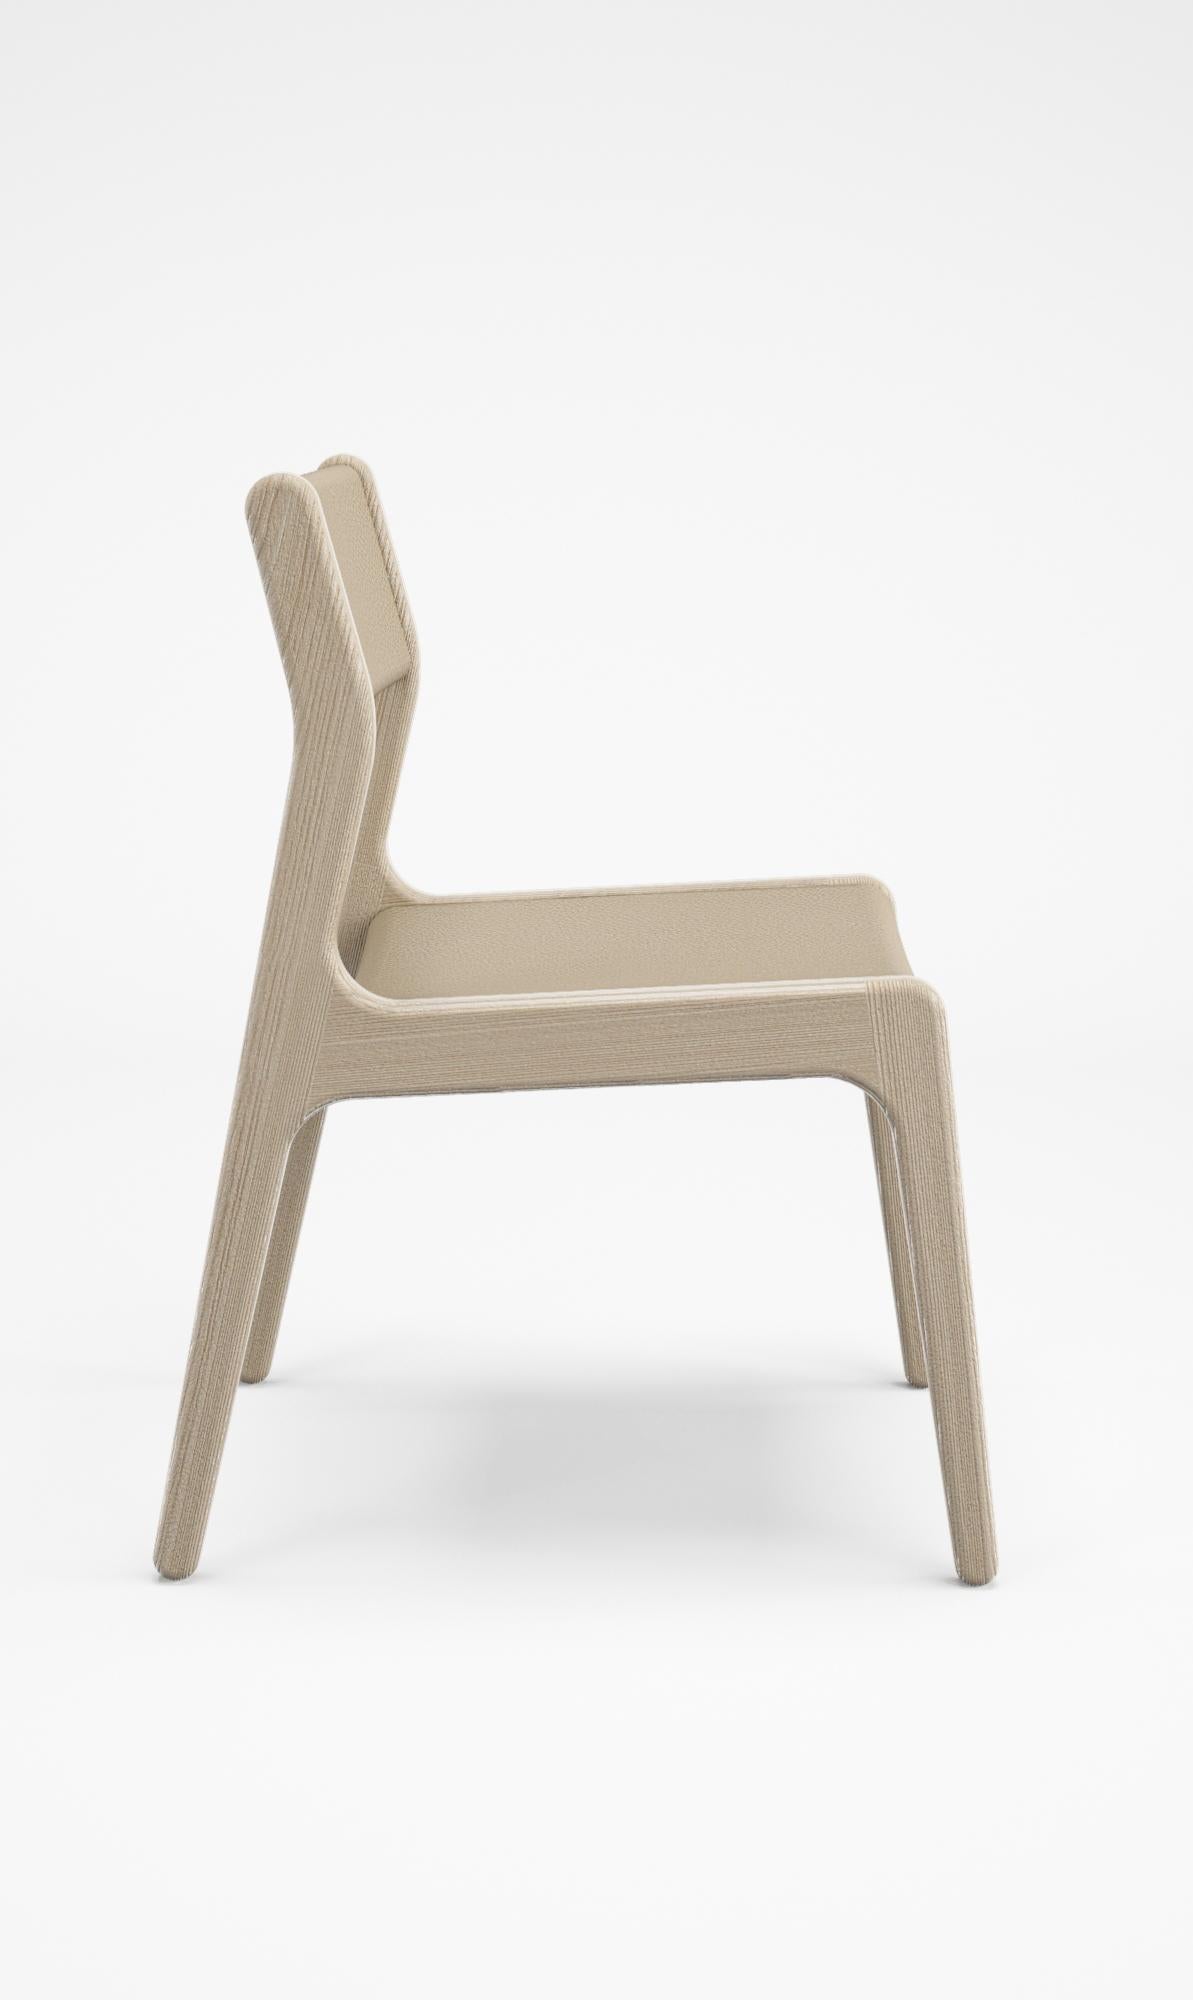 Deer chair is inspired by the delicate legs of a deer The Deer series consists of a dining chair, an armless chair, and a bar stool (also with armless versions as well). These pieces are one of the studio’s early archetype explorations, deeper dives